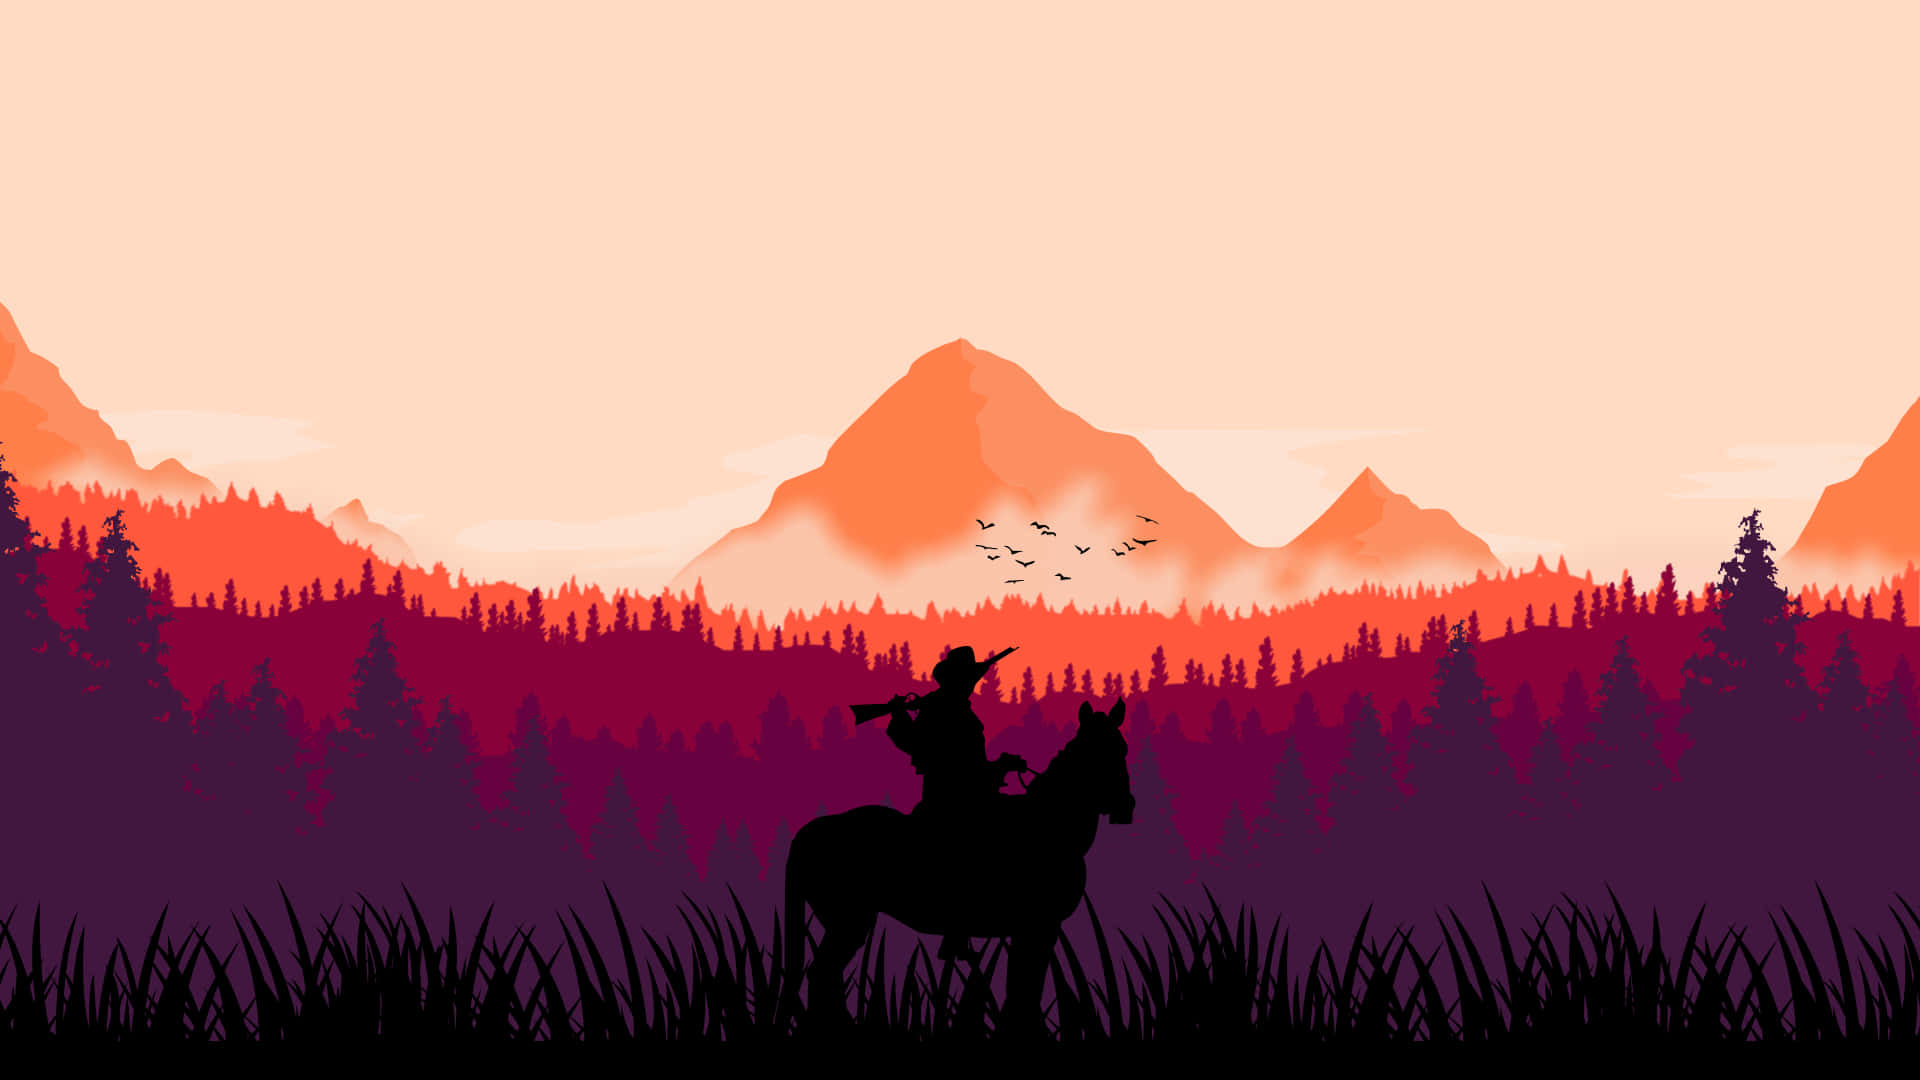 A Silhouette Of A Man Riding A Horse In The Mountains